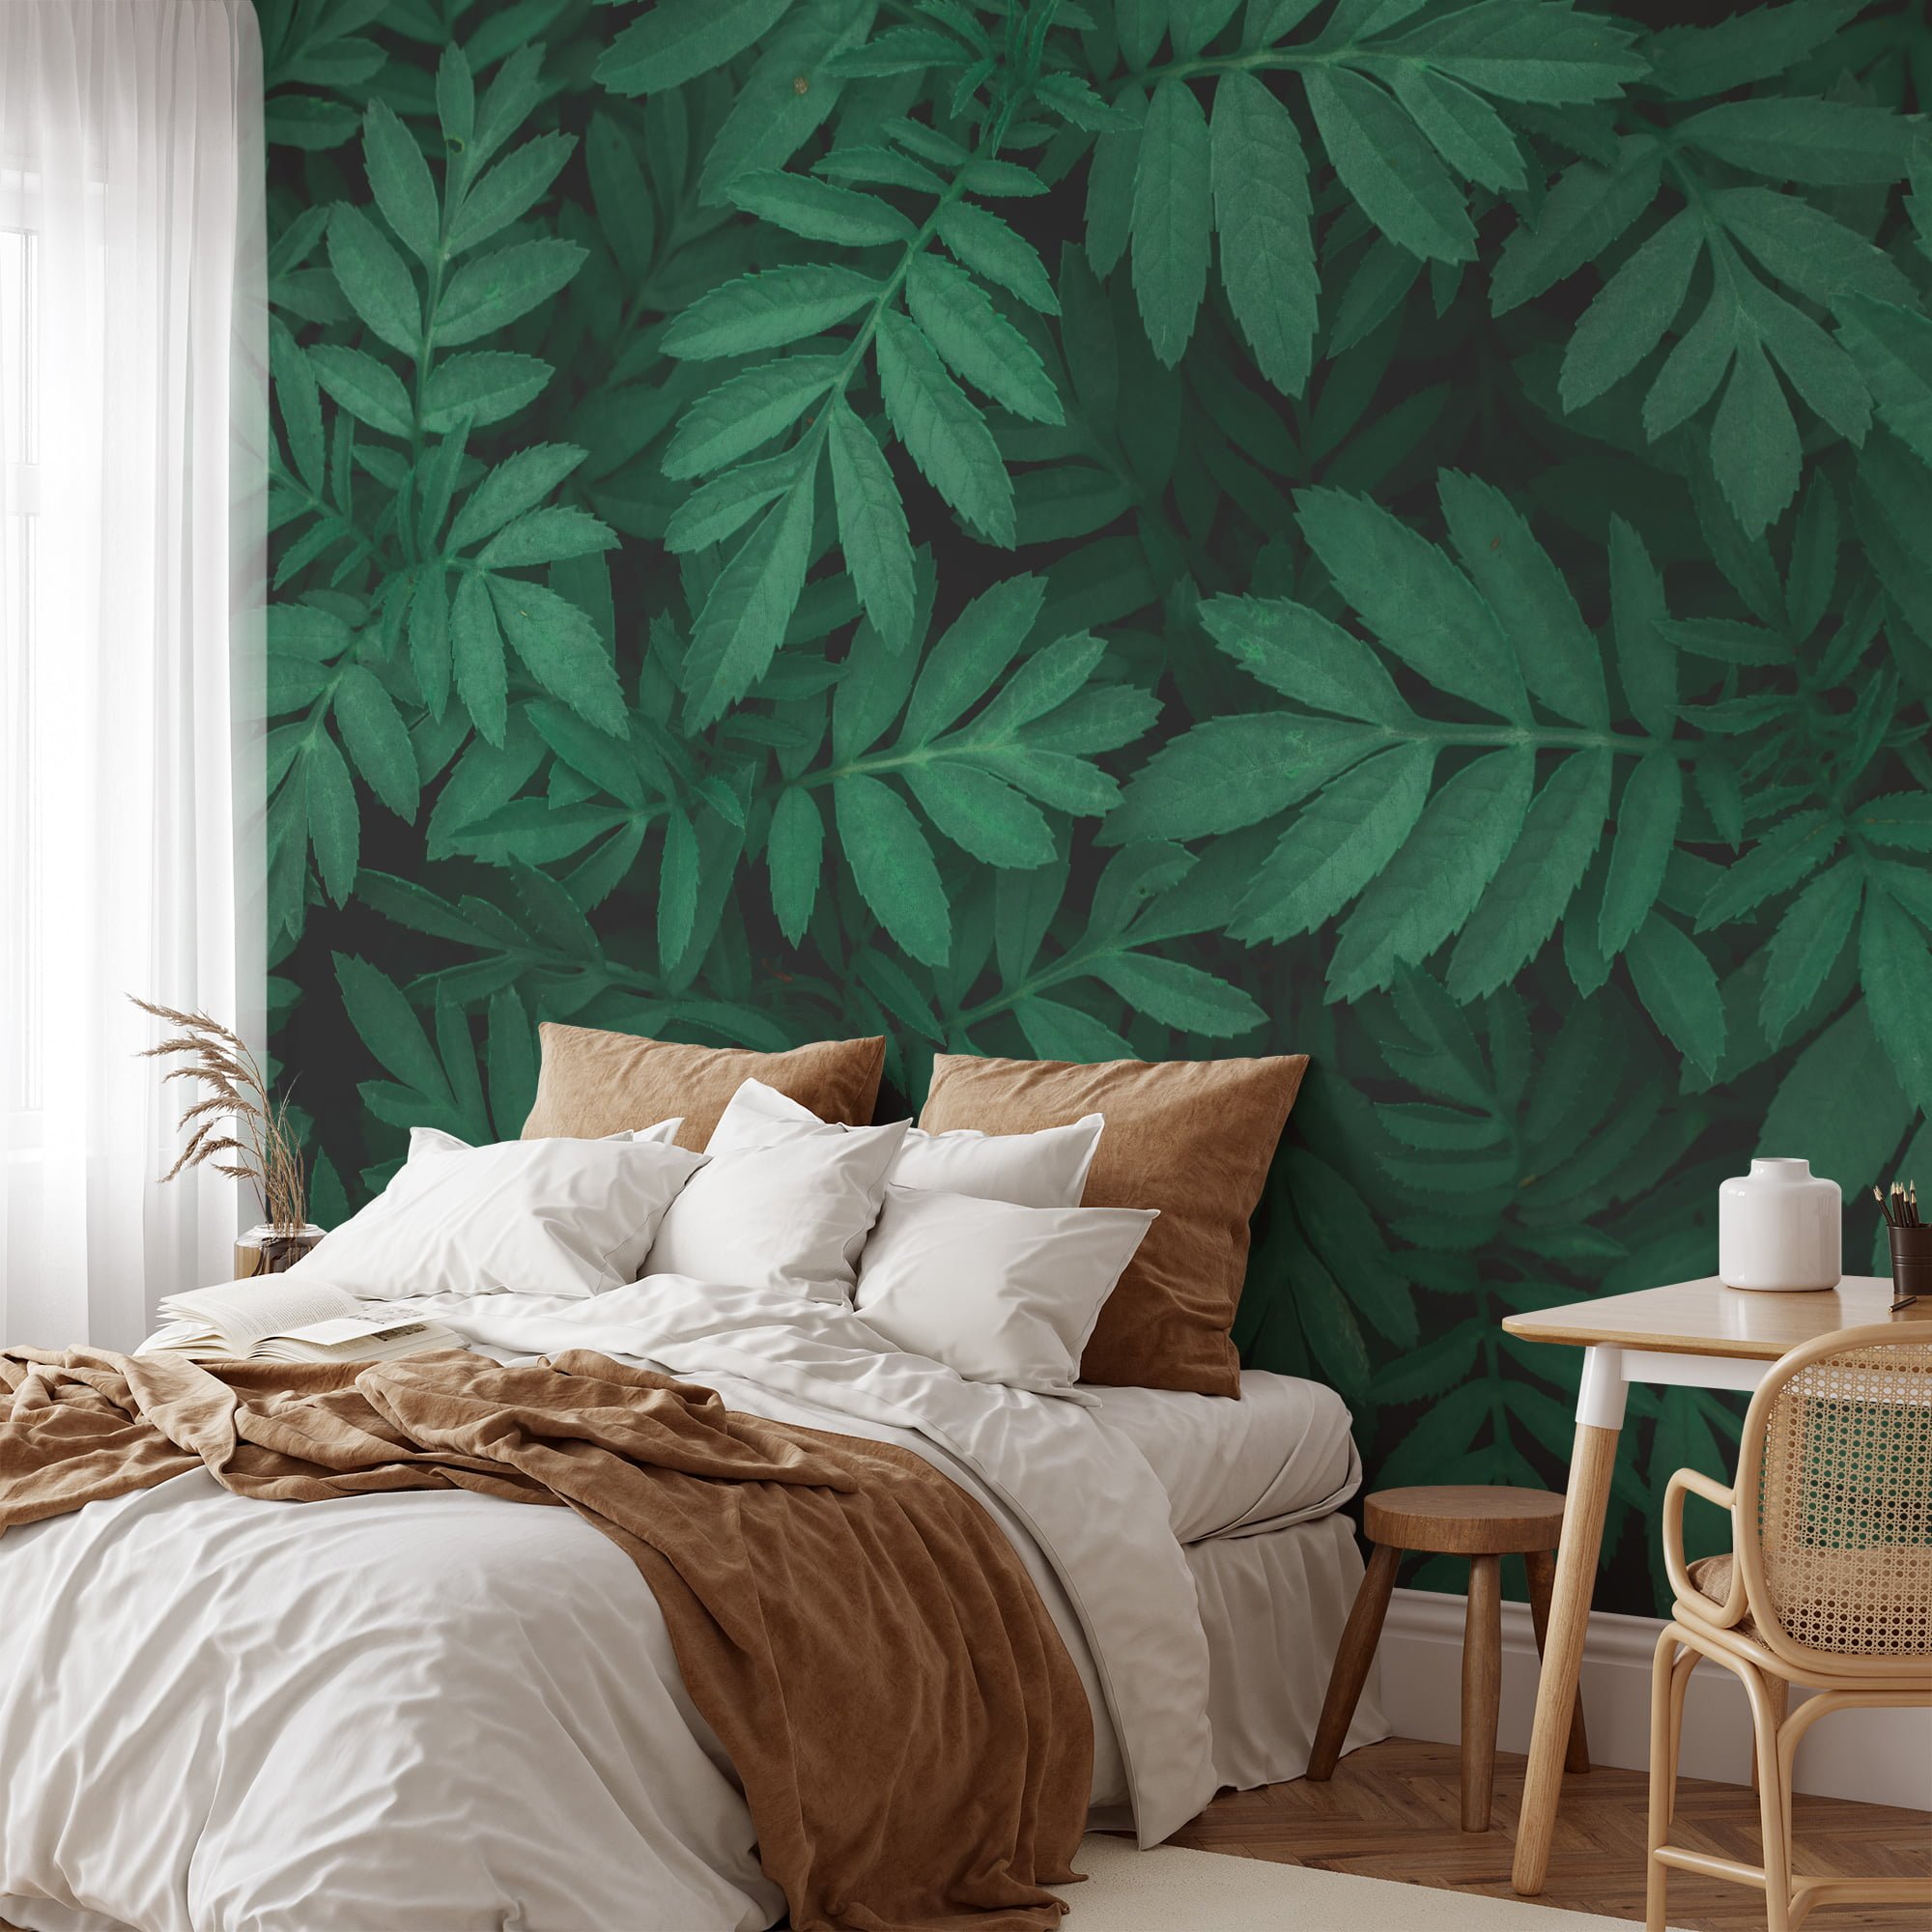 Nature-Inspired Green Leaves Pattern - Self-Adhesive Peel and Stick Botanical Wallpaper to Bring the Outdoors Inside, Removable for Easy Updating | Muralium